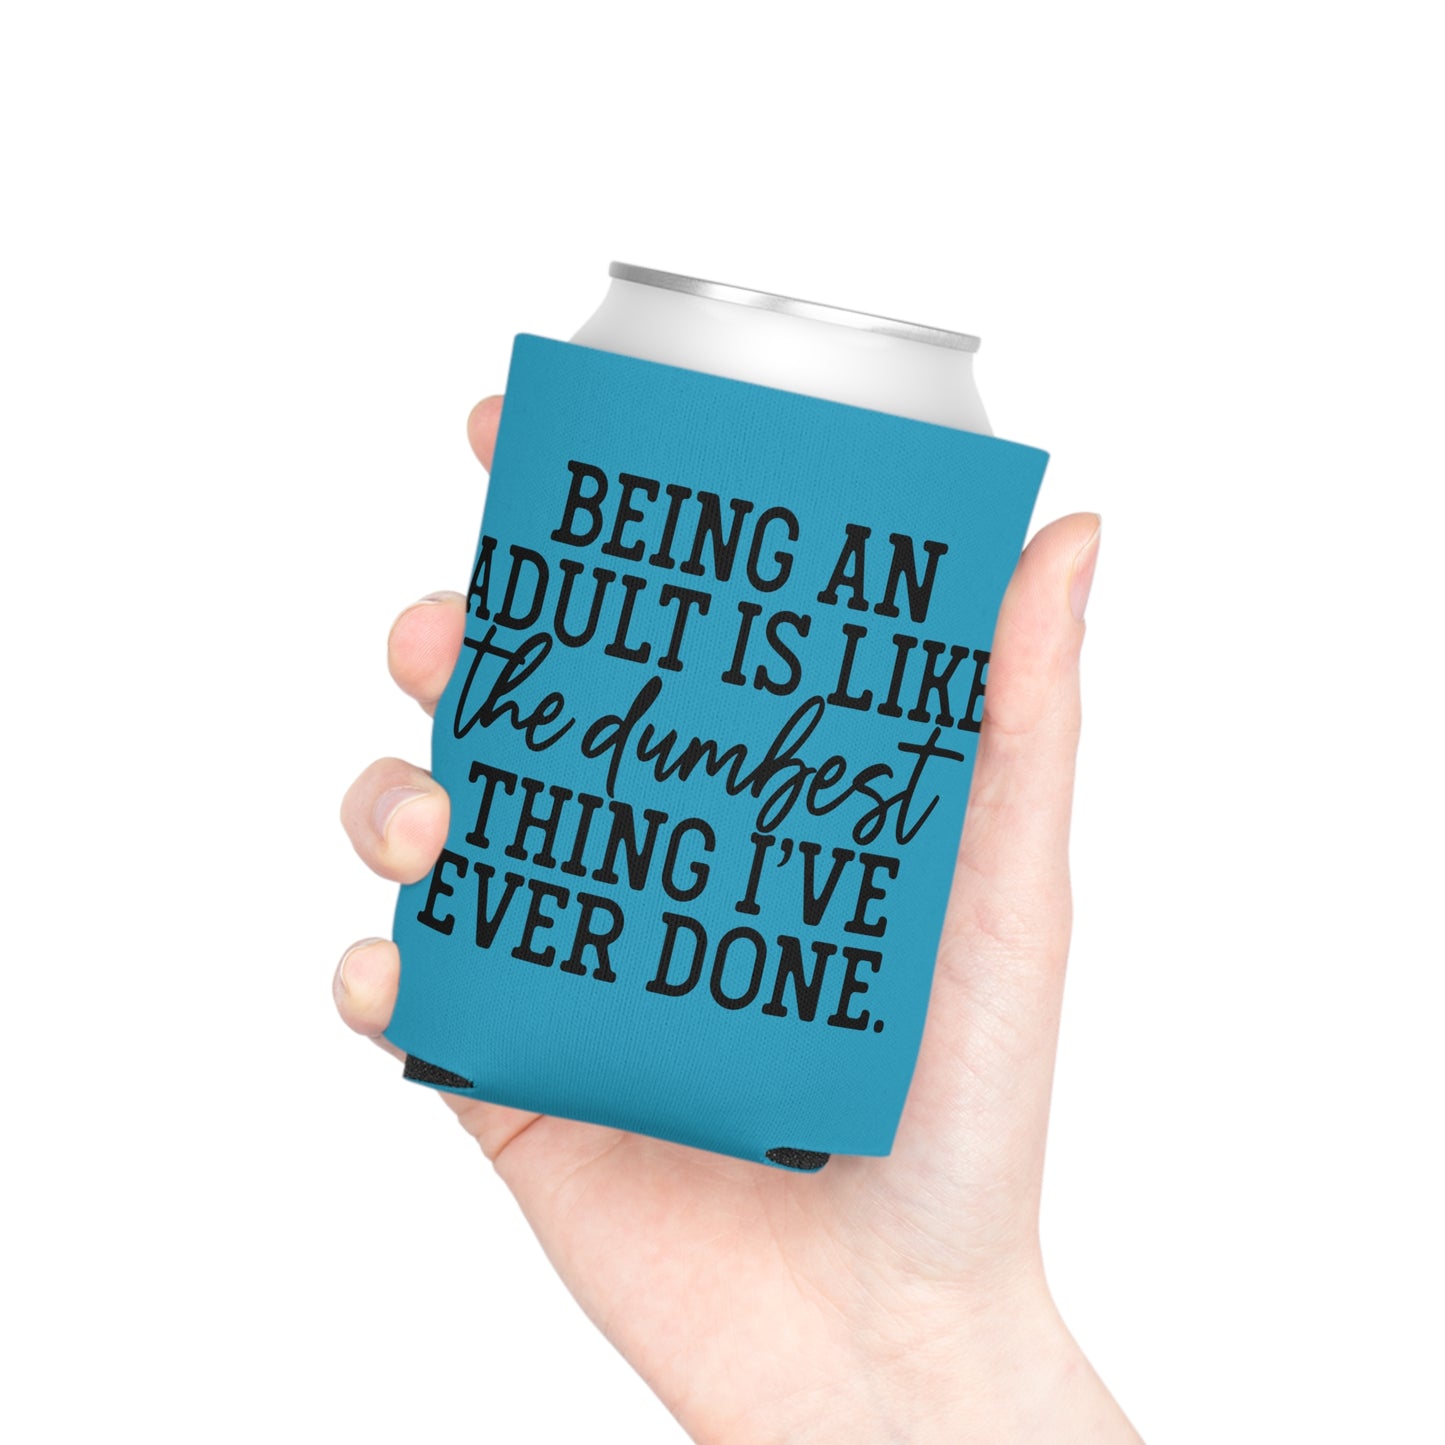 "Being an Adult is like the Dumbest Thing I've Ever Done" Can Cooler - Teal